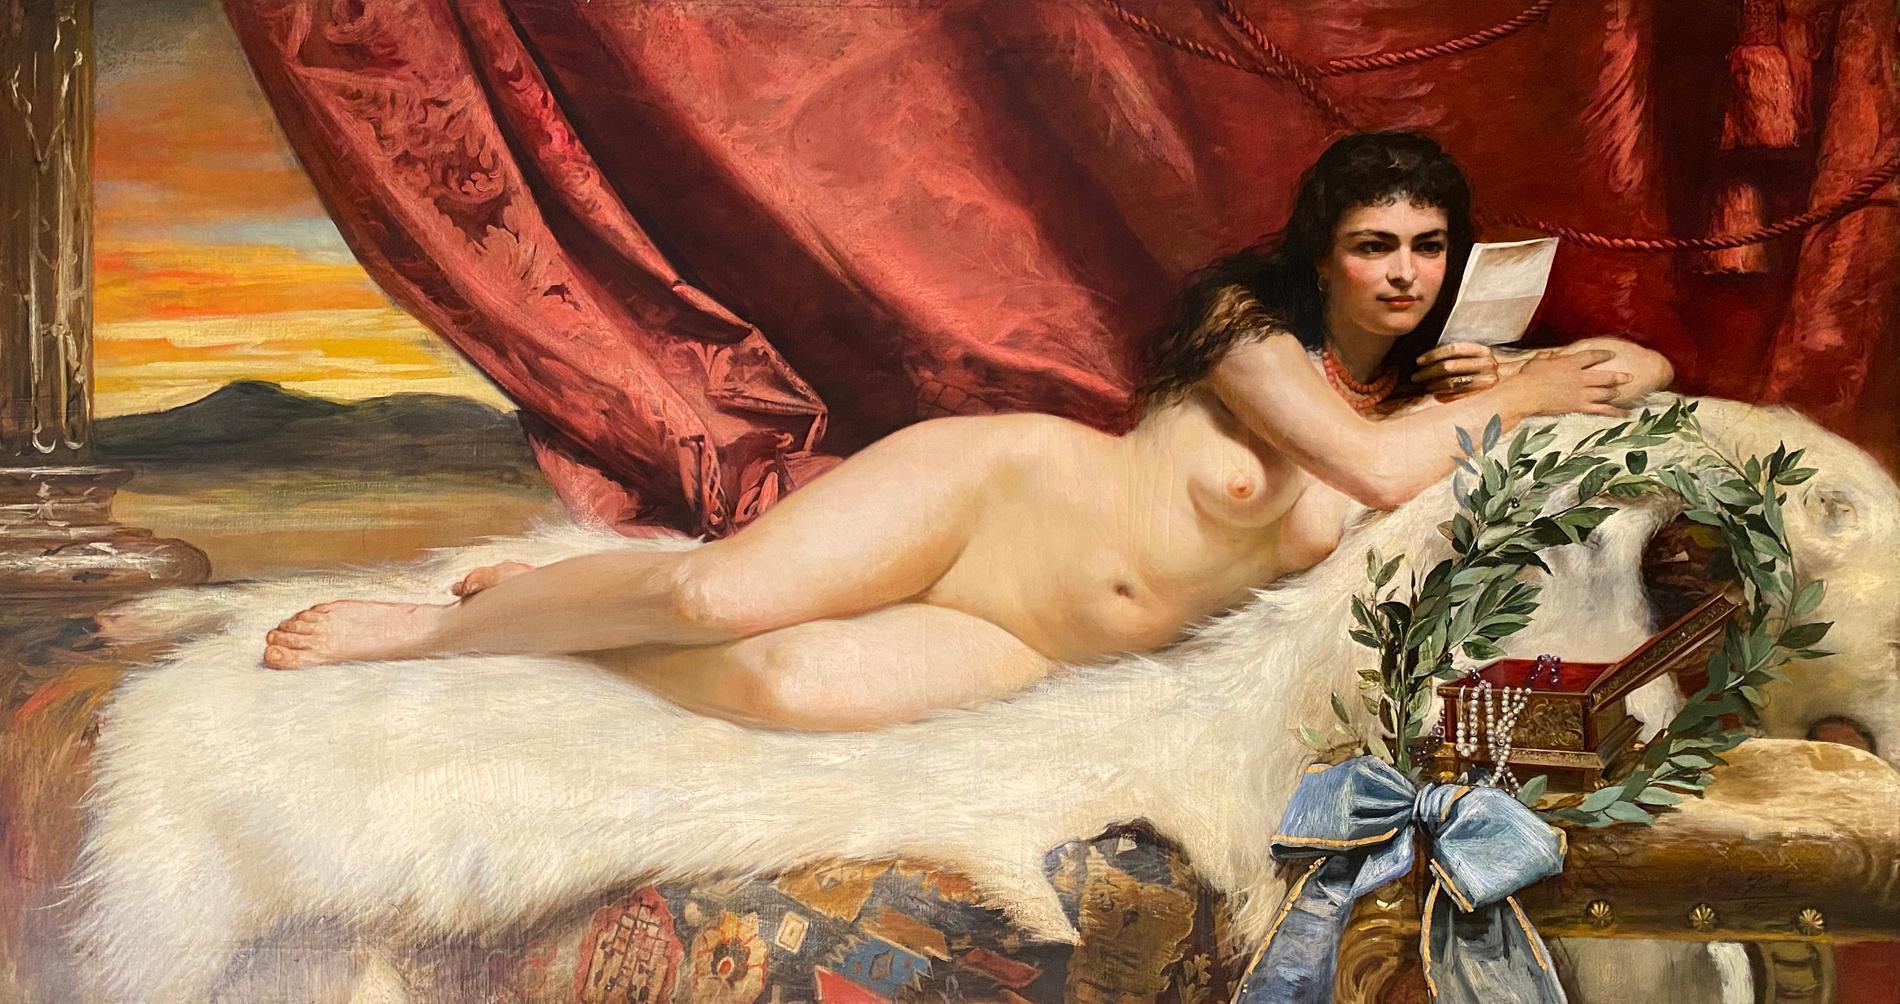 Adolf Pirsch (1858 - 1929, Austrian) A Monumental Oil on Canvas of A Reclining Orientalist Nude Reading

Signed and dated lower right, 1895.

Very large and vibrant. Good quality.

Provenance: Christie's London June 21, 2002 Lot 250

Canvas size: